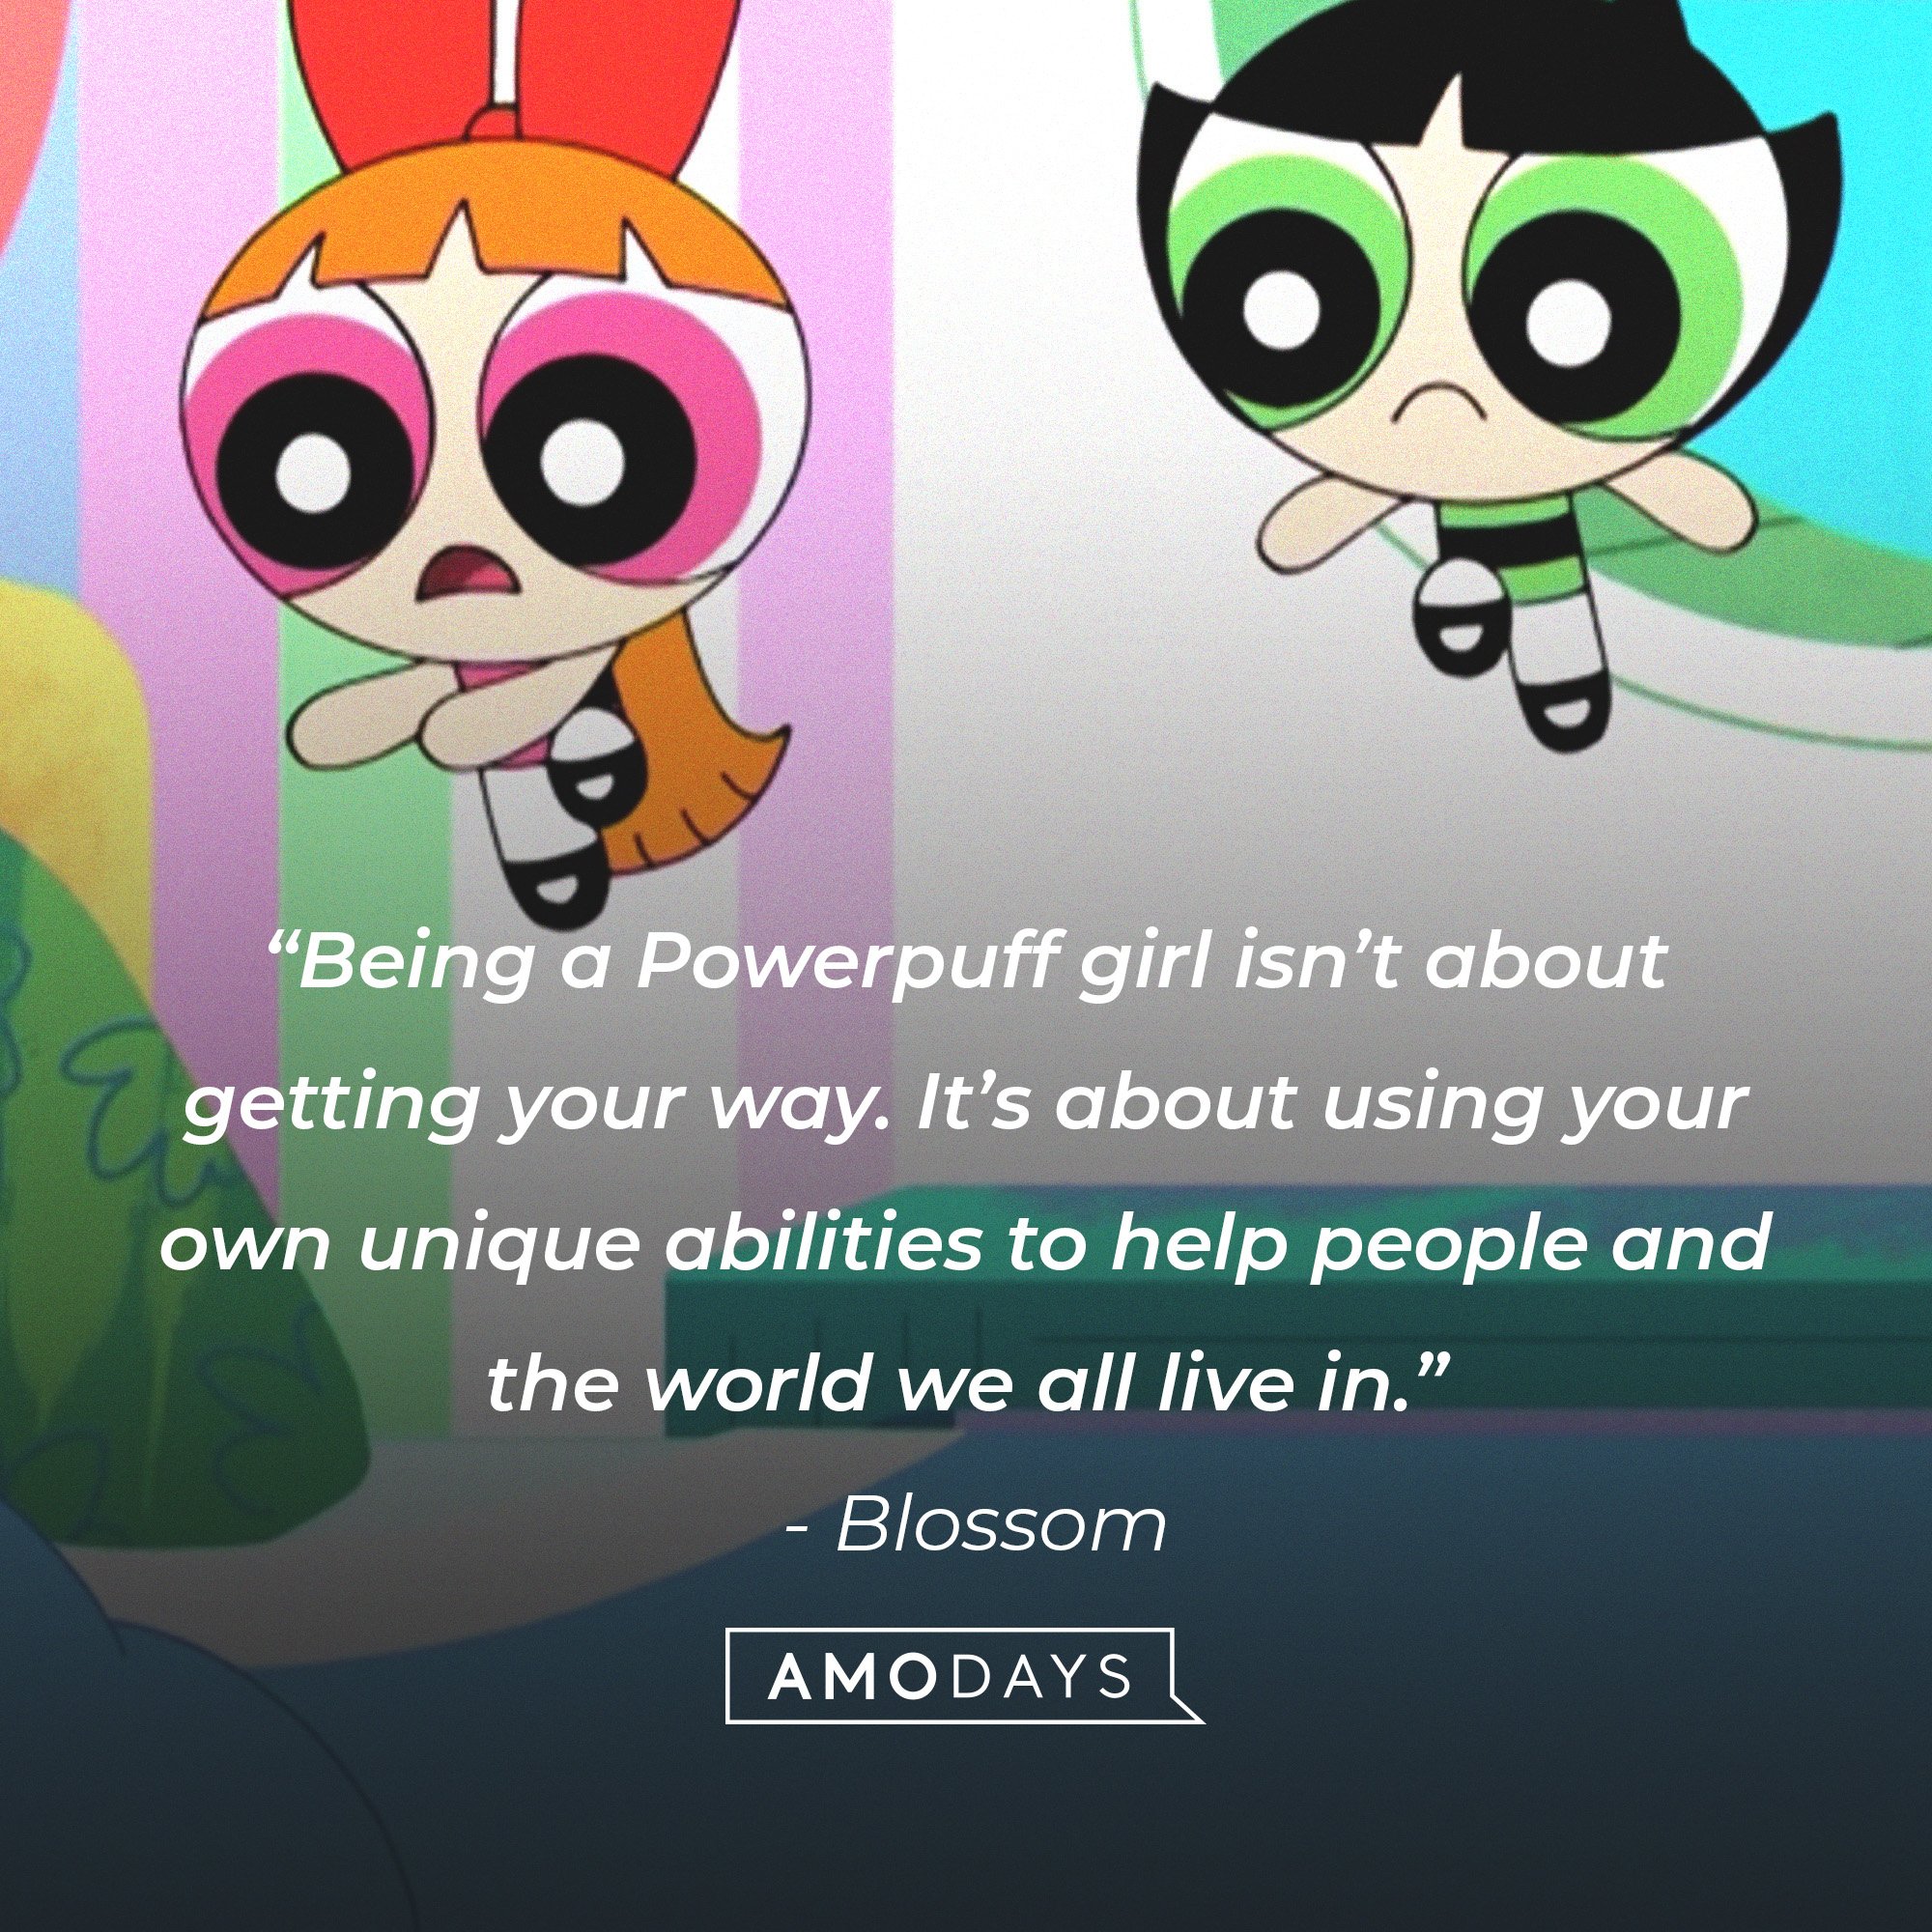 Blossom’s quote: “Being a Powerpuff girl isn’t about getting your way. It’s about using your own unique abilities to help people and the world we all live in.” | Image: AmoDays